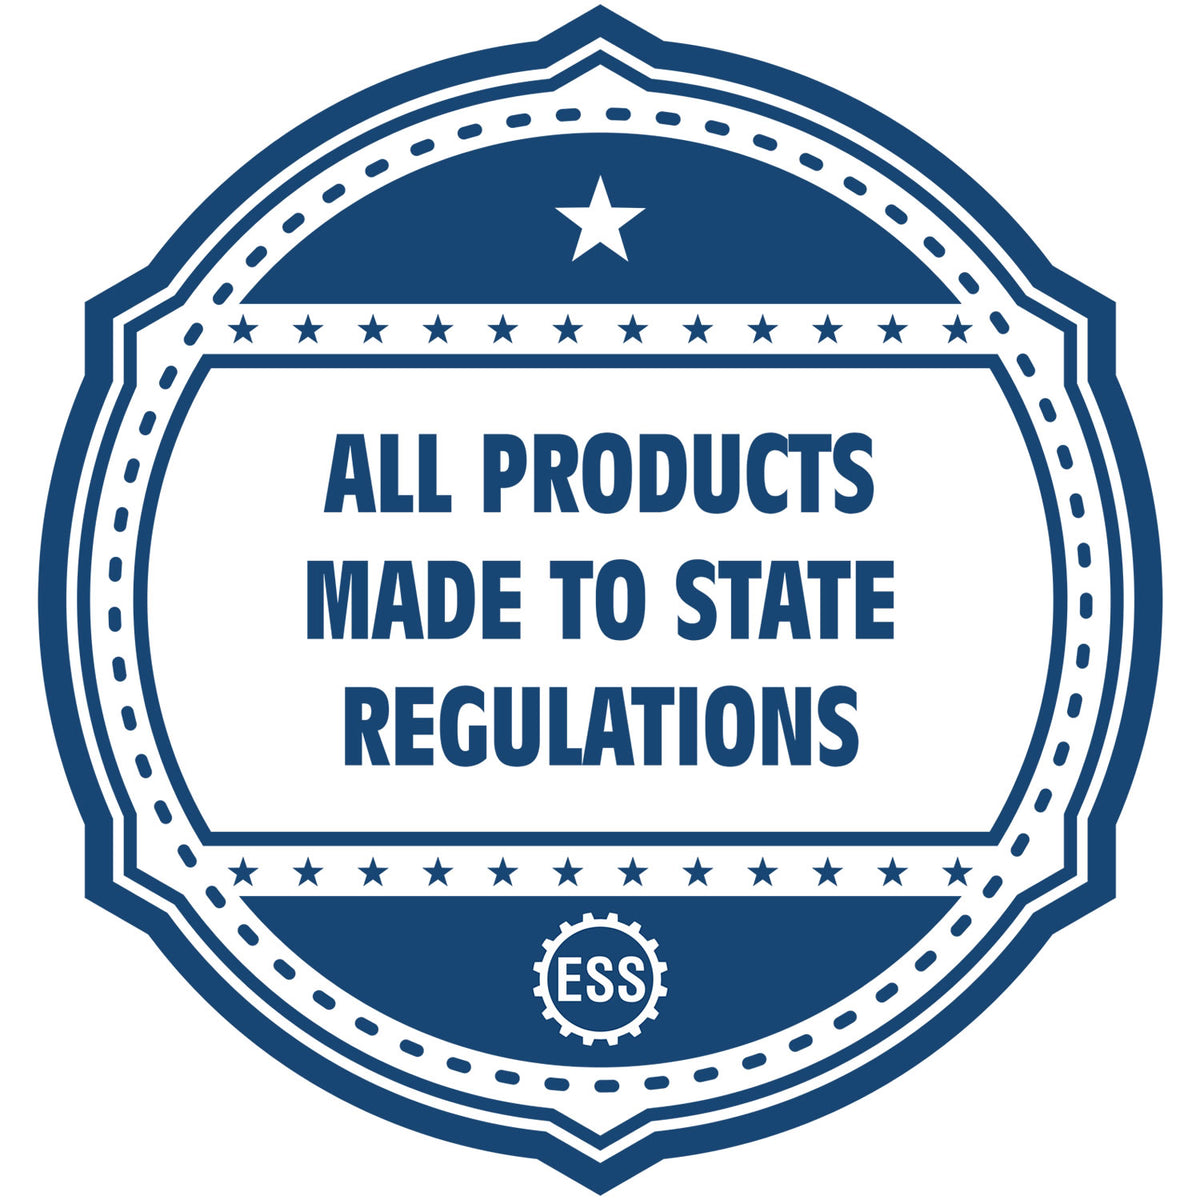 An icon or badge element for the MaxLight Premium Pre-Inked Puerto Rico Rectangular Notarial Stamp showing that this product is made in compliance with state regulations.